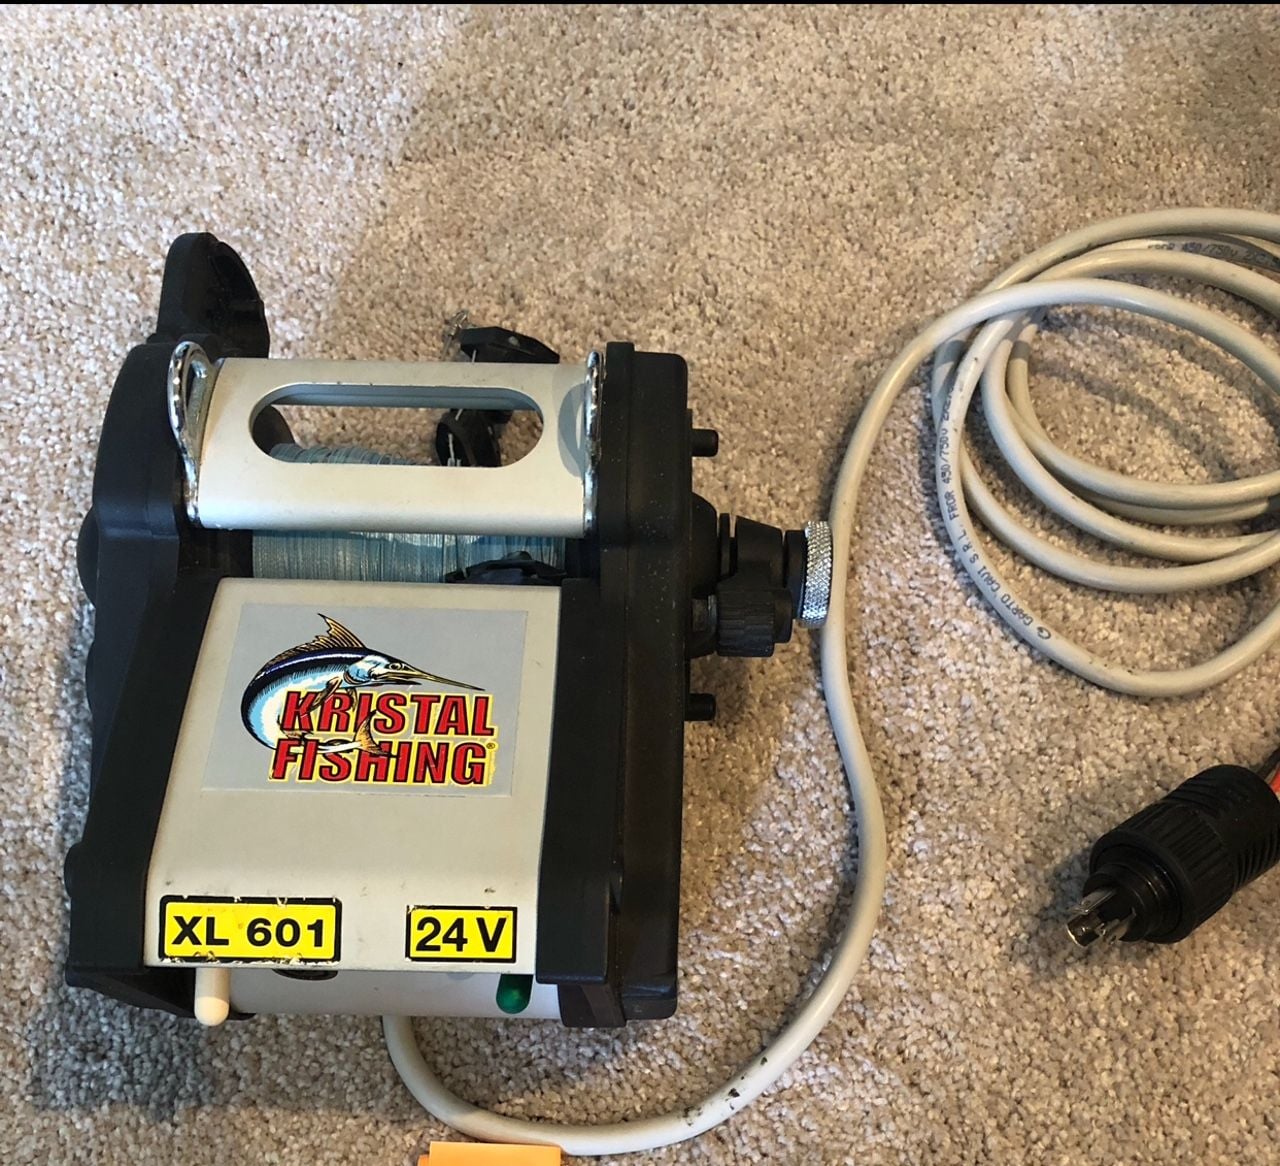 Kristal XL601 Electric Kite, Deep dropping, Teaser Reel $300 **SOLD** - The  Hull Truth - Boating and Fishing Forum